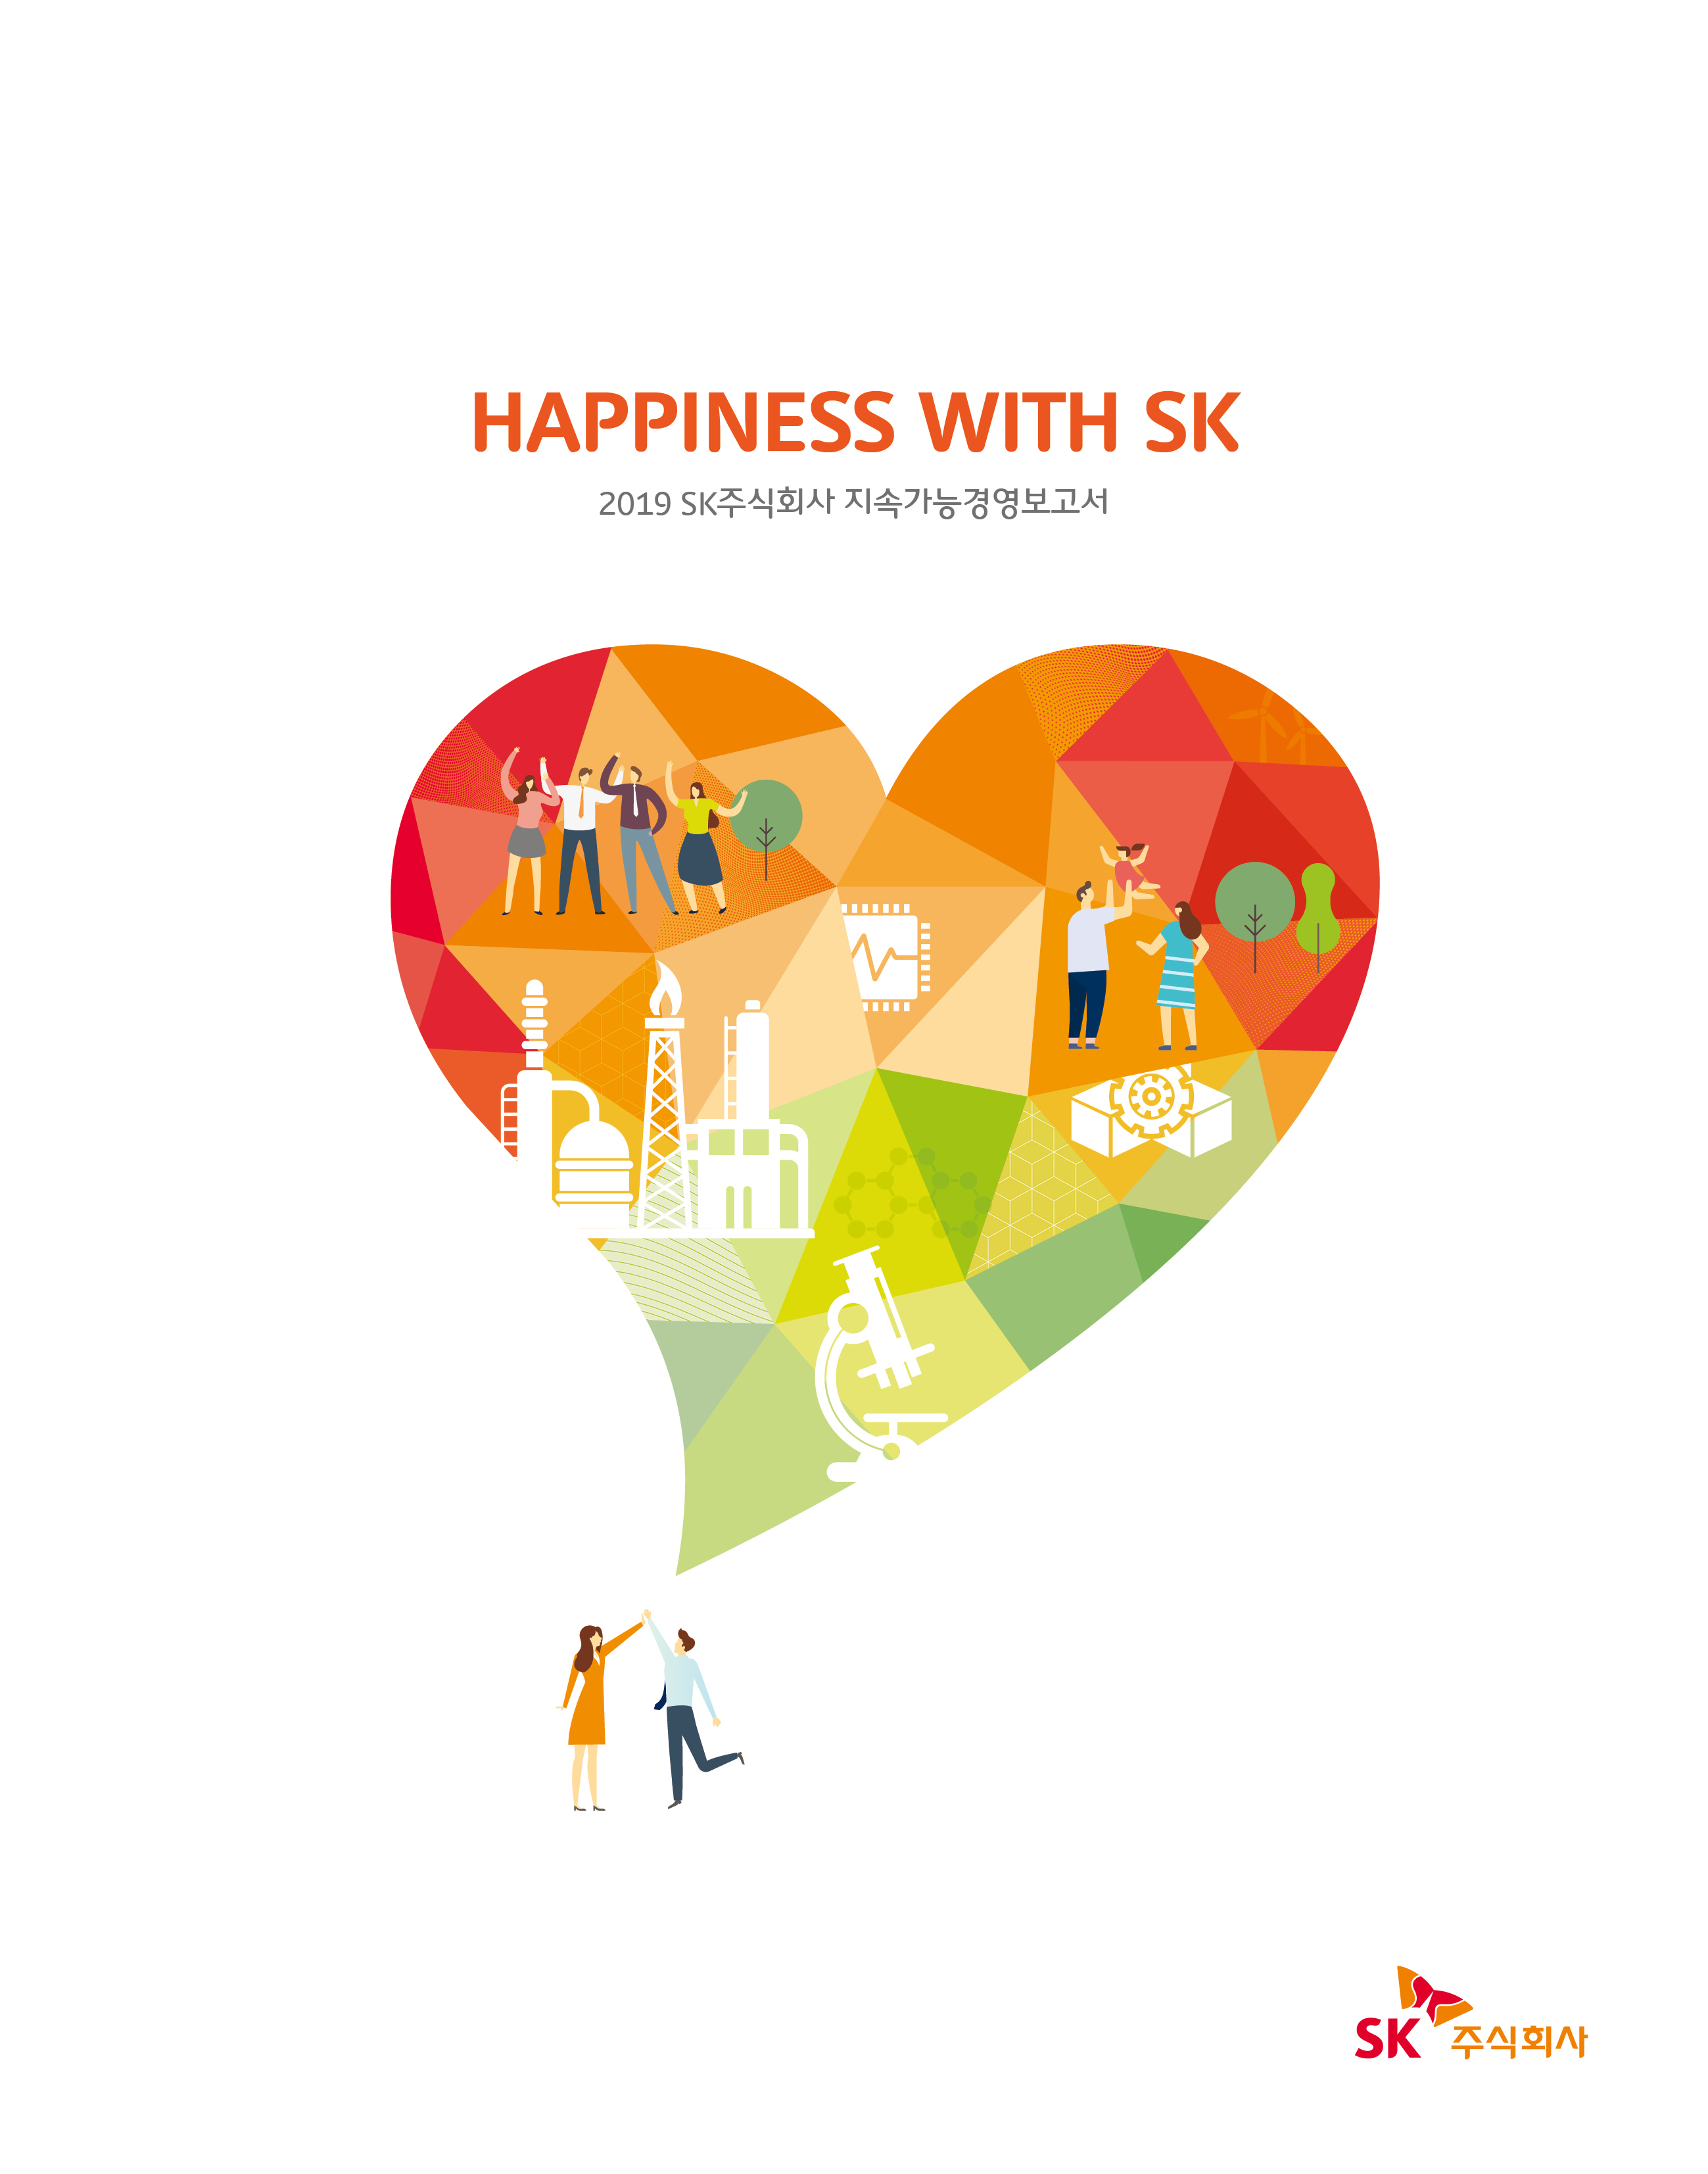 ▲ SK 지속가능경영보고서 HAPPINESS WITH SK